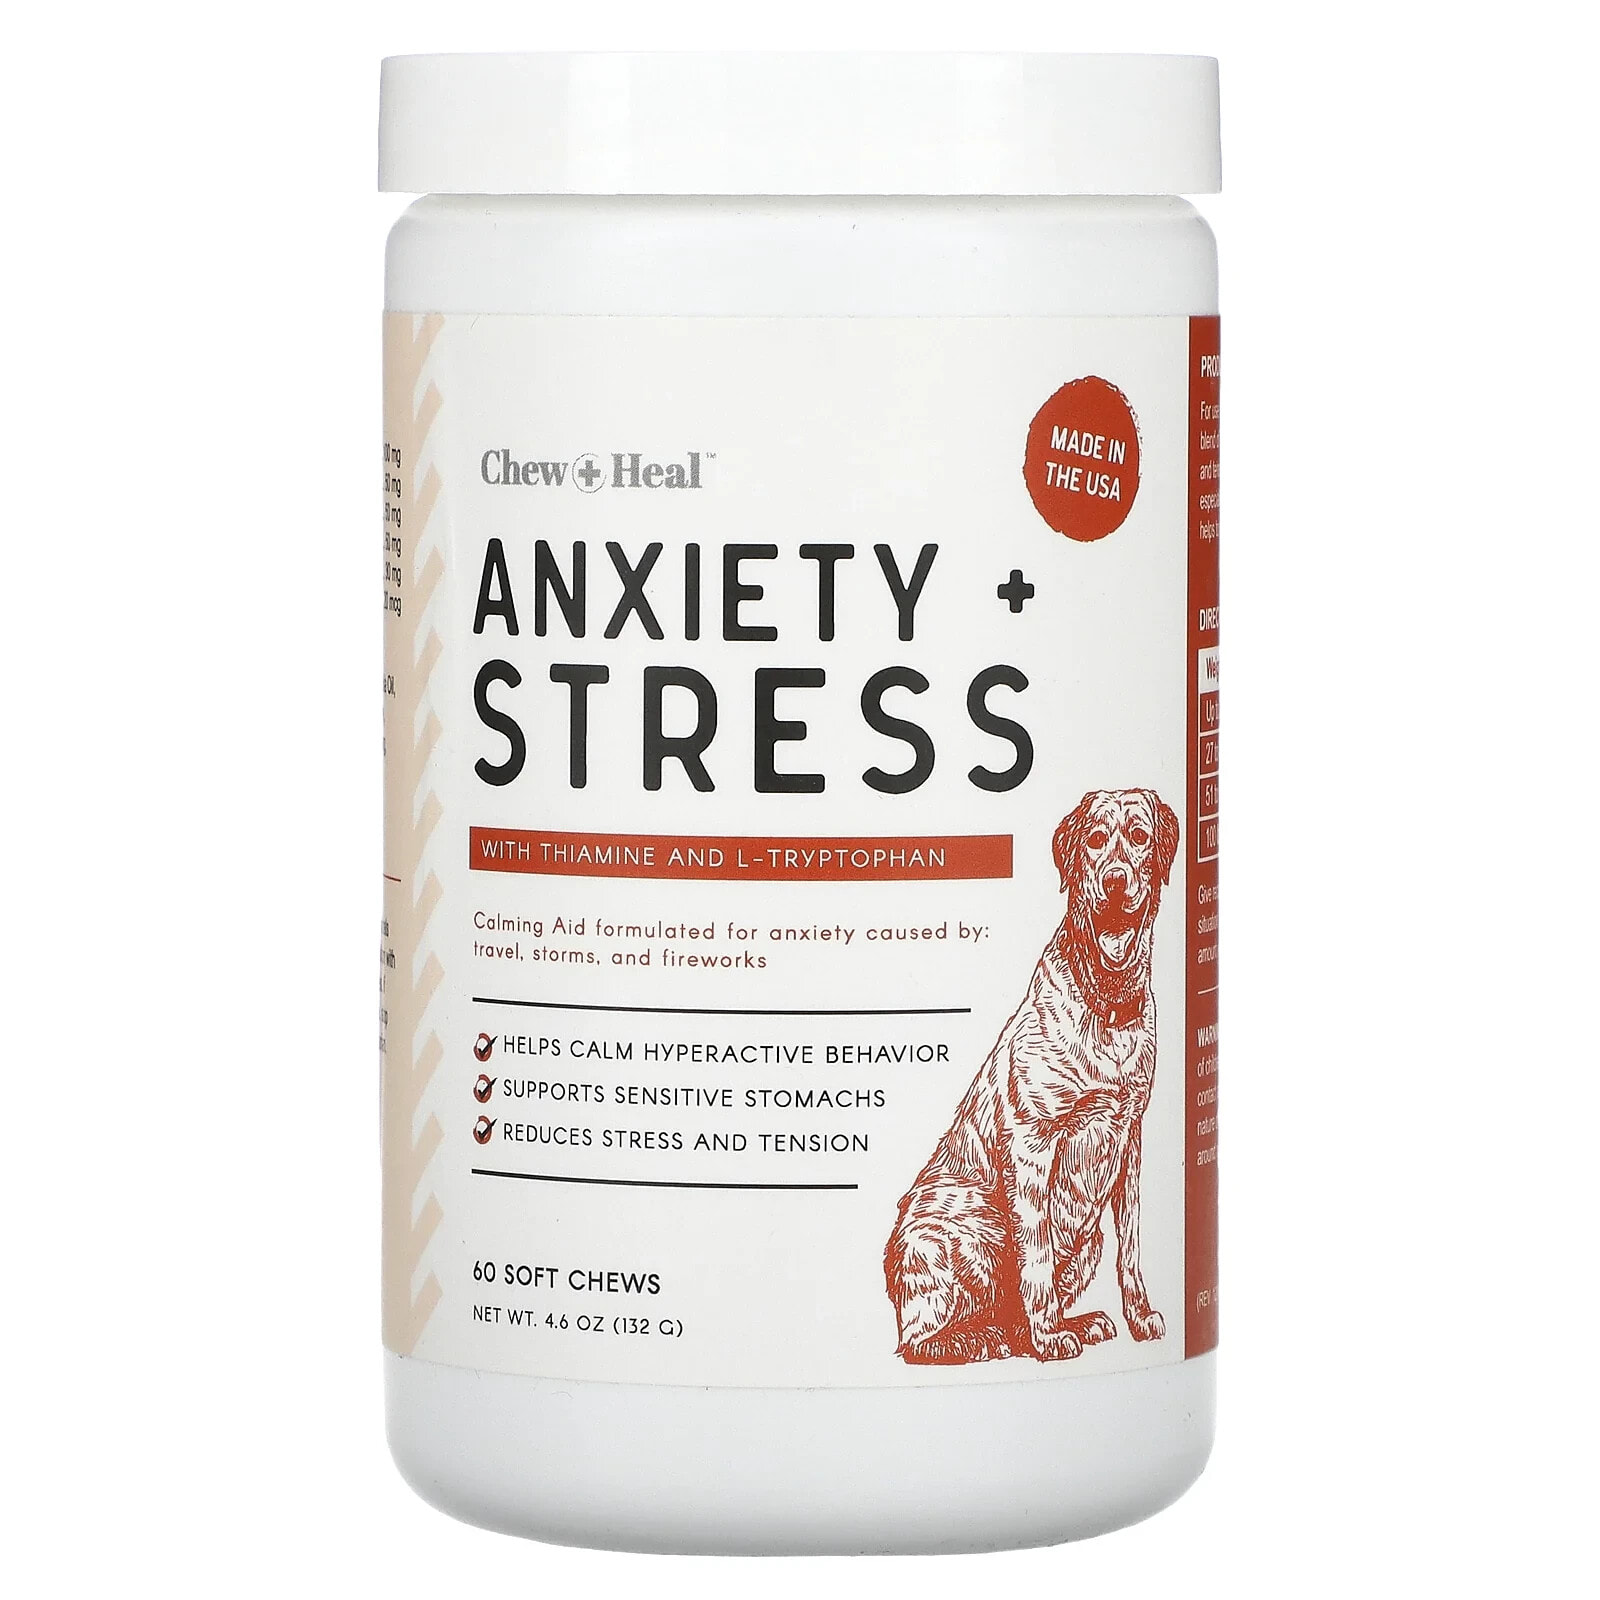 Chew + Heal, Anxiety + Stress, For Dogs, 30 Soft Chews, 2.3 oz (66 g)